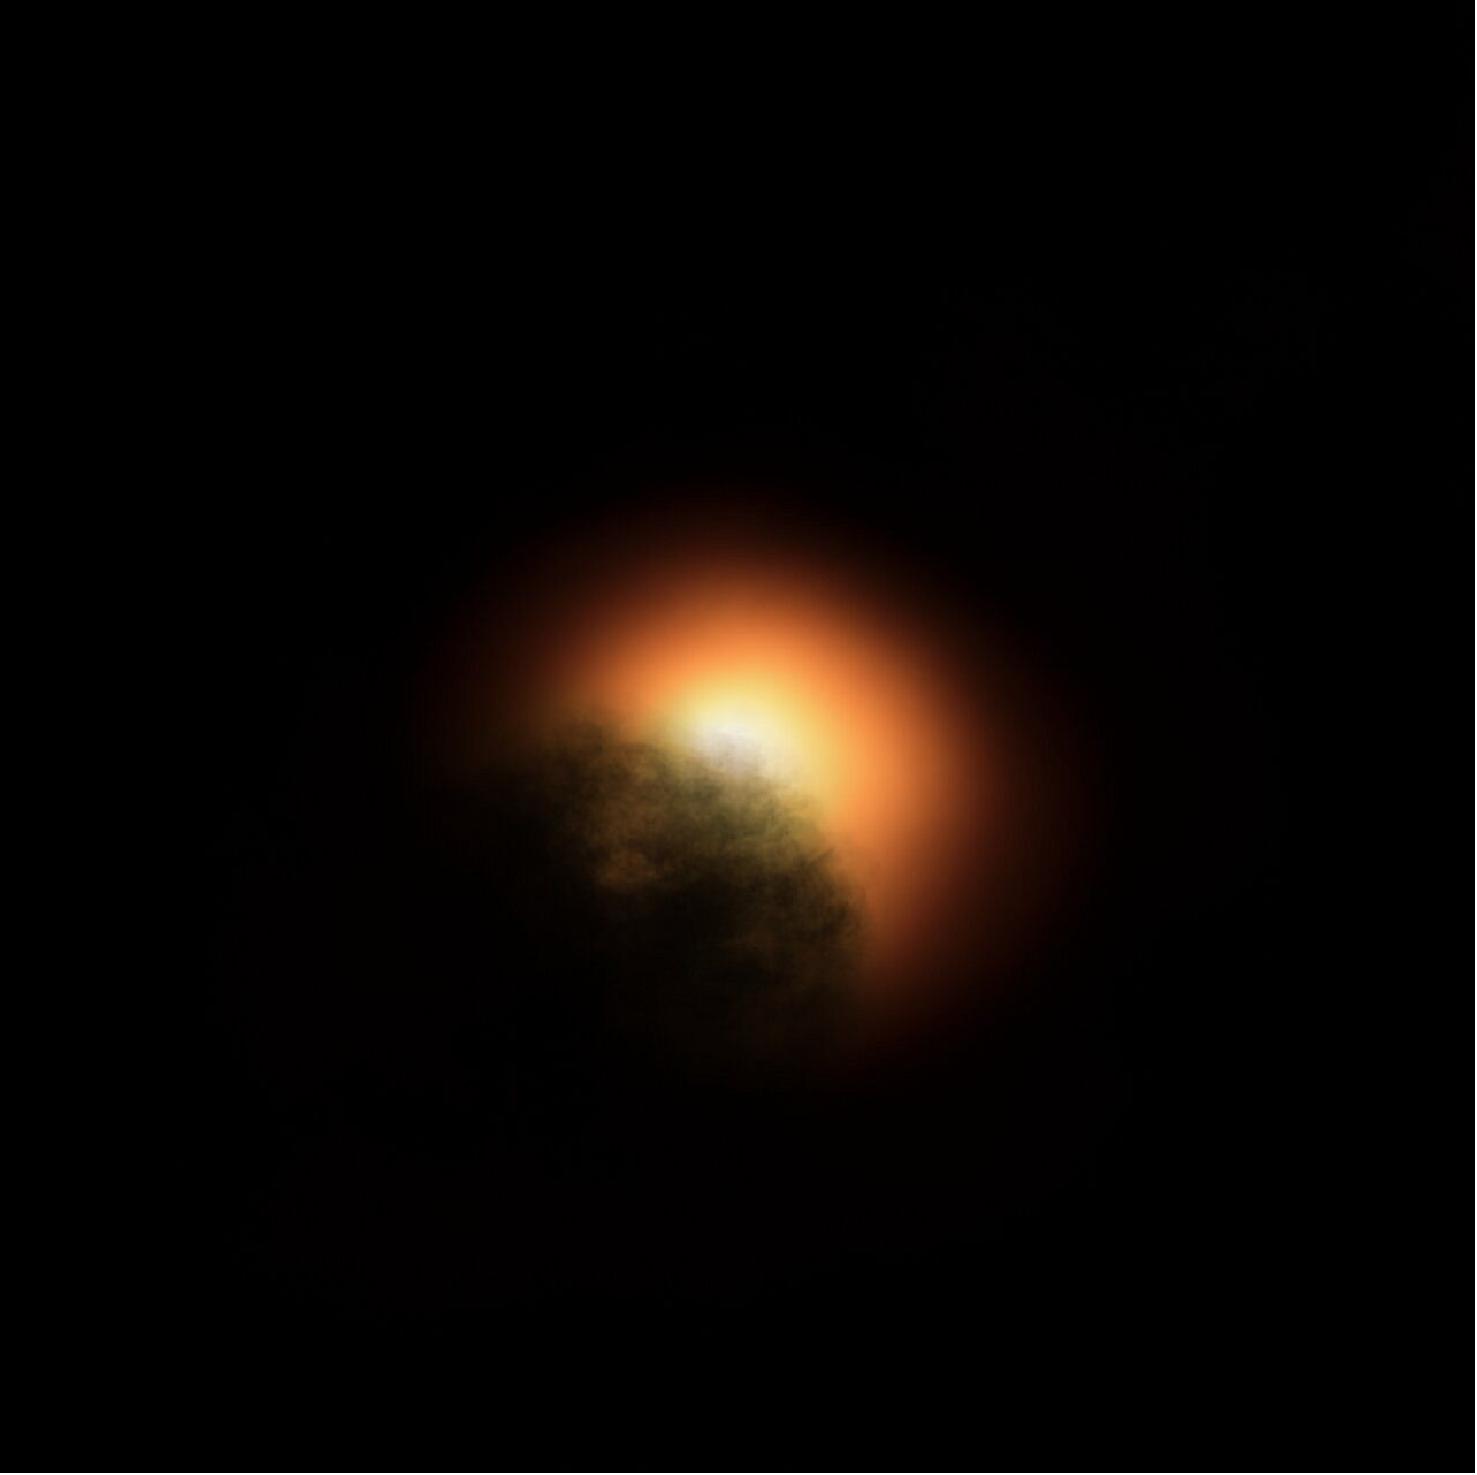 Figure 40: Betelgeuse’s Dust Cloud. This artist's impression was generated using an image of Betelgeuse from late 2019 taken with the SPHERE instrument on the European Southern Observatory's Very Large Telescope (image credit: ESO, ESA/Hubble, M. Kornmesser)